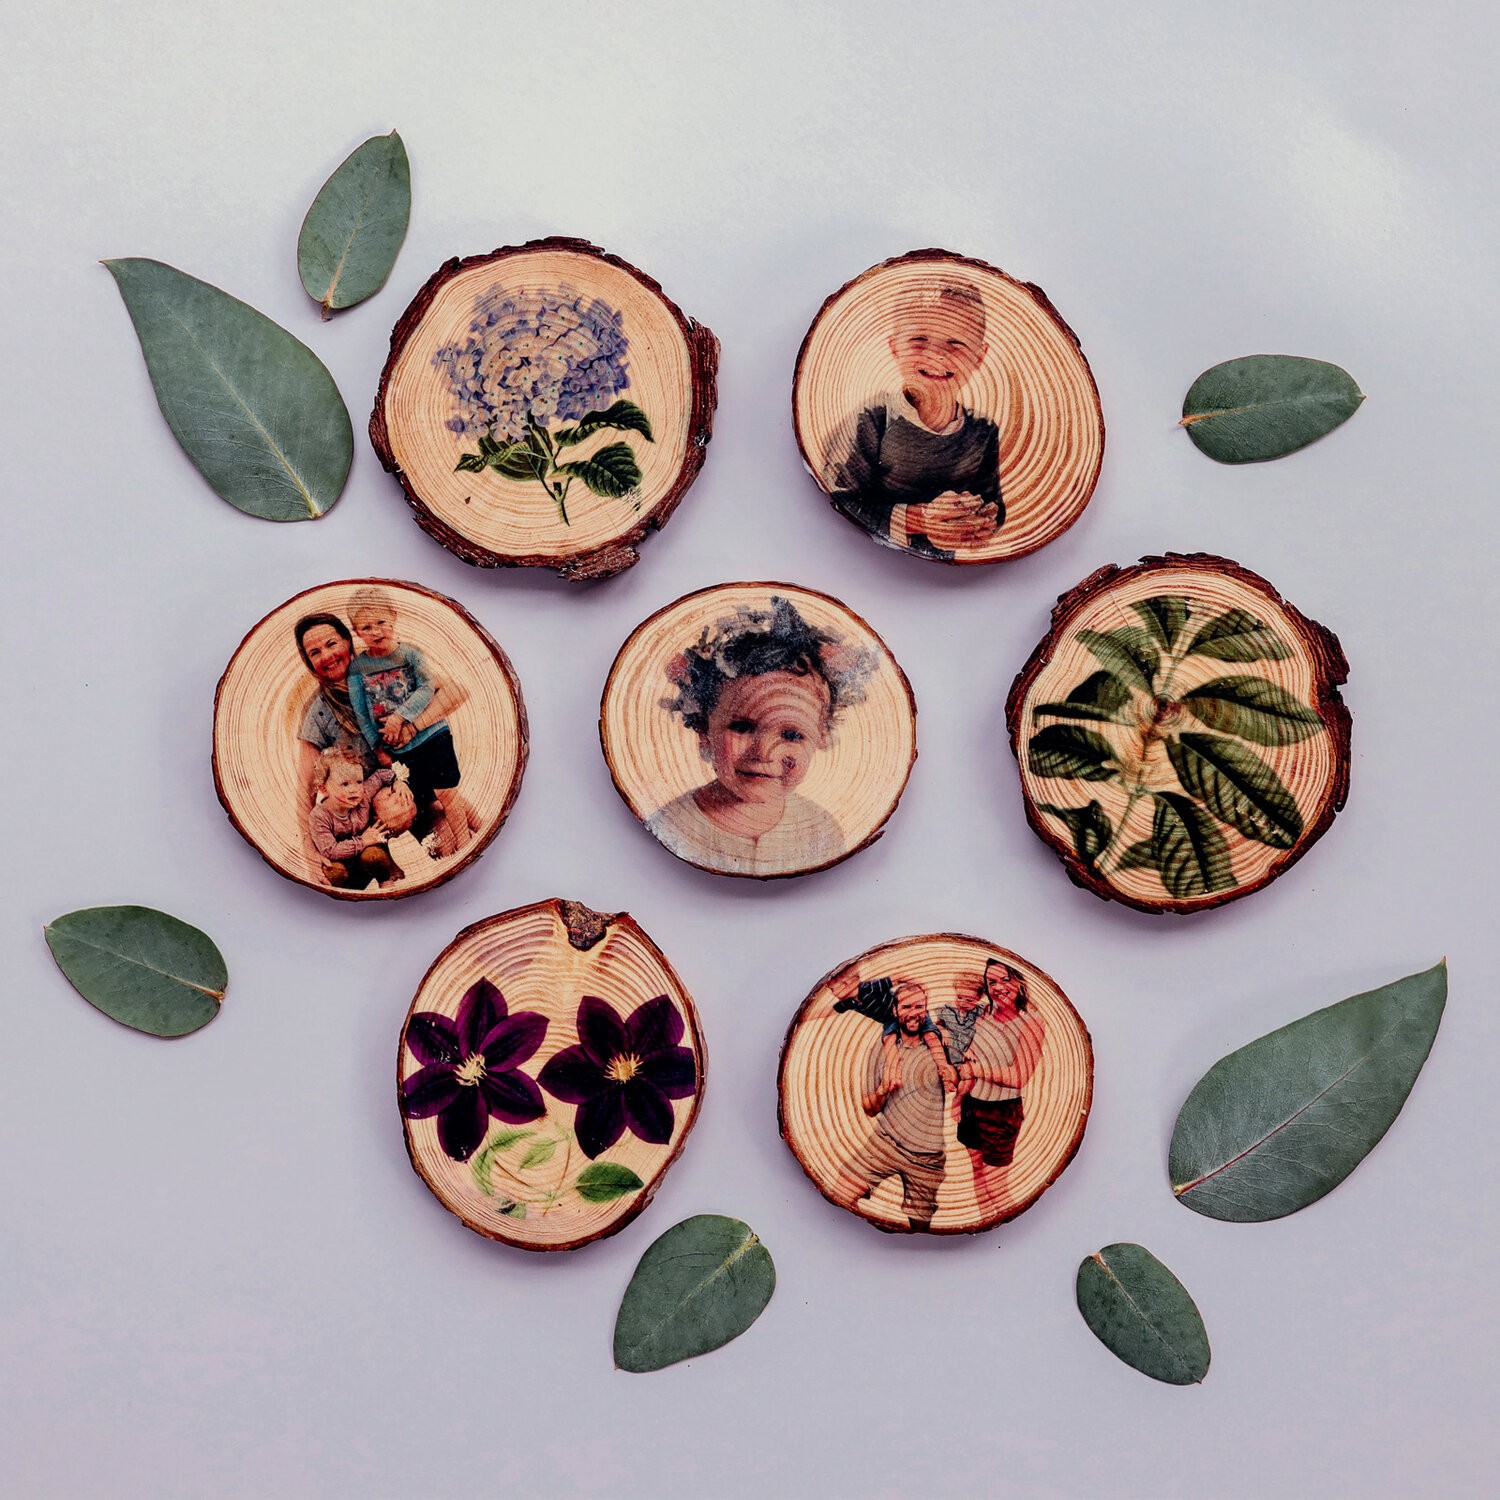 Wooden blocks with photos on them lie on a table with leaves around them.